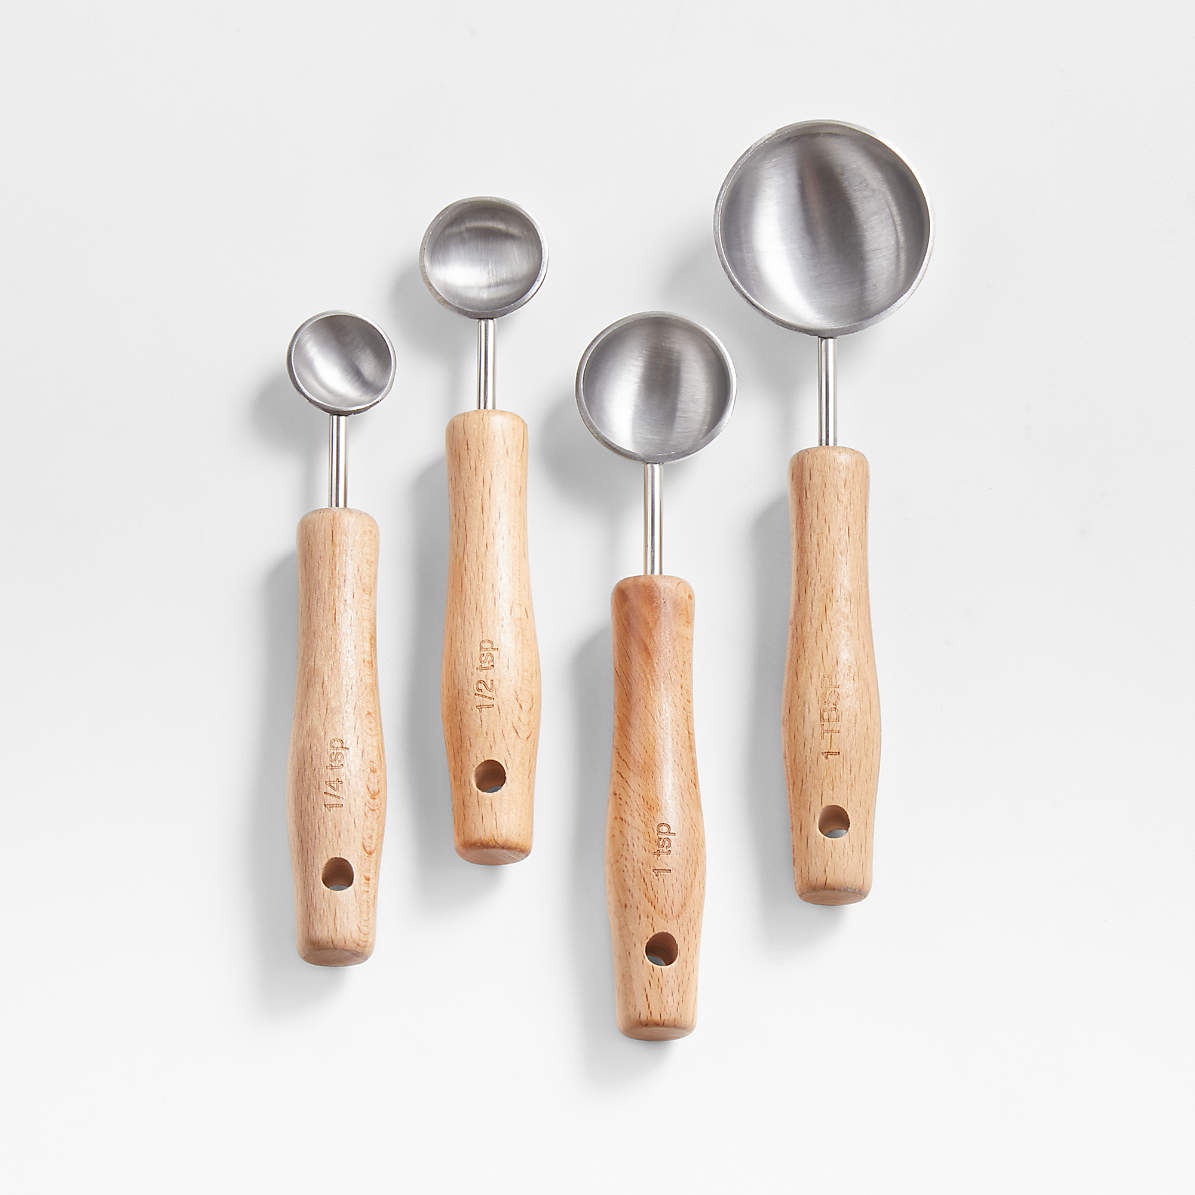 Stainless Steel Odd-Size Measuring Spoons, Set of 3 | Crate & Barrel